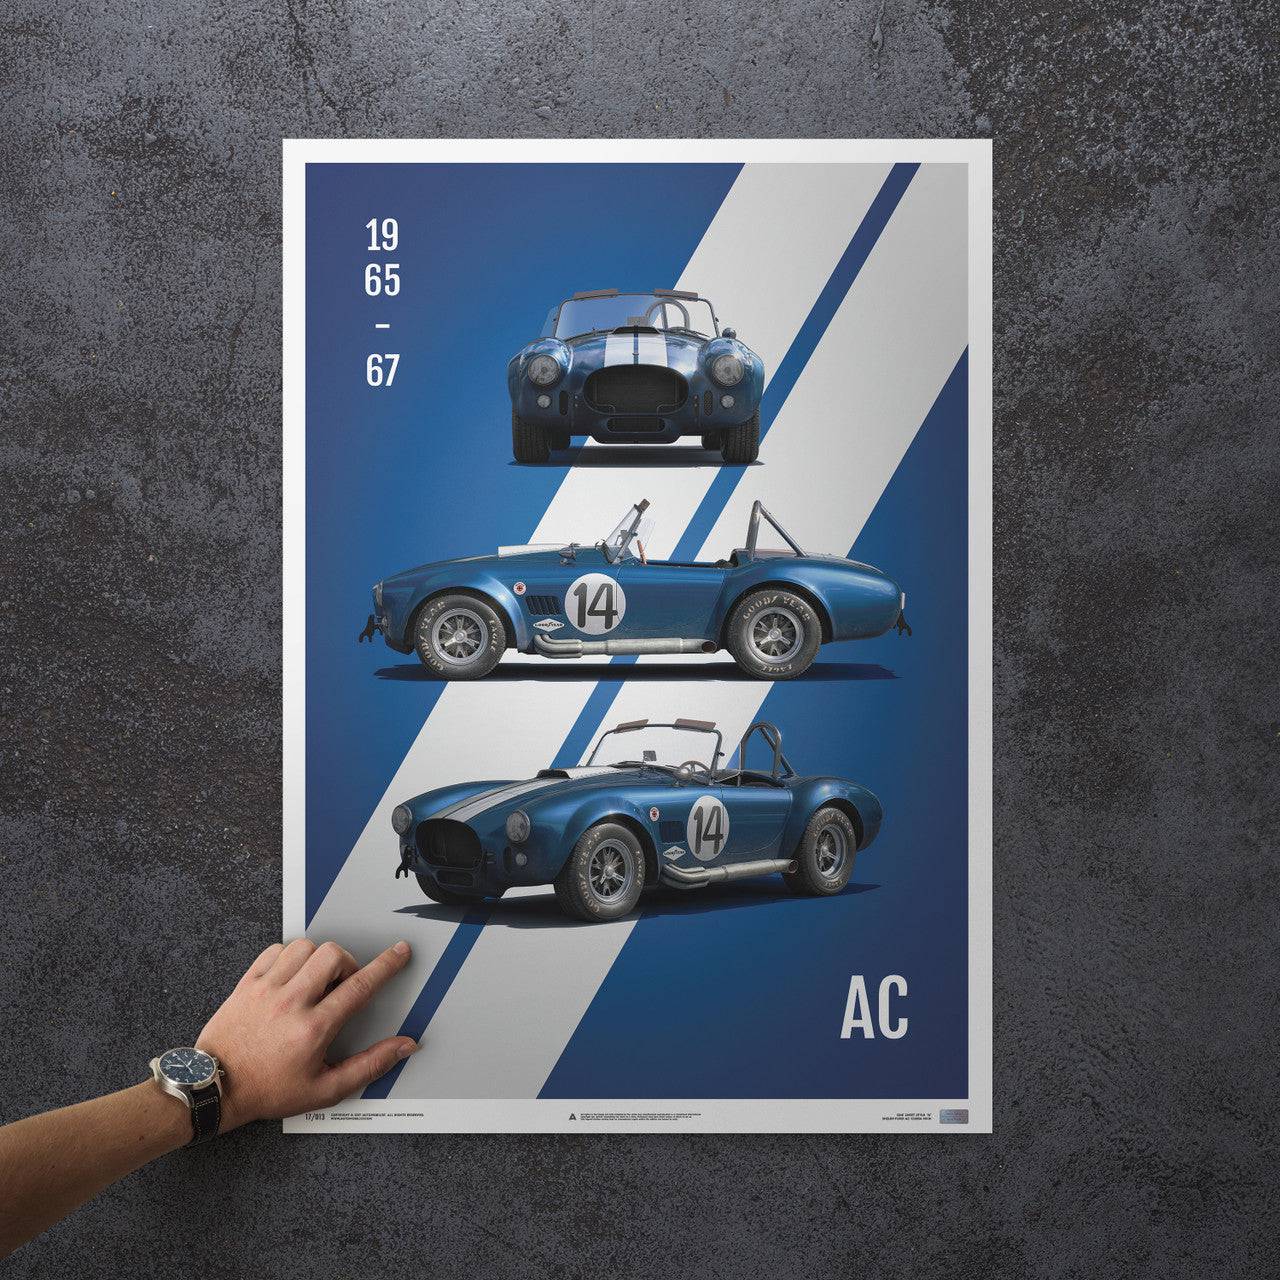 Shelby-Ford AC Cobra Mk III - Blue - 1965 - Limited Poster